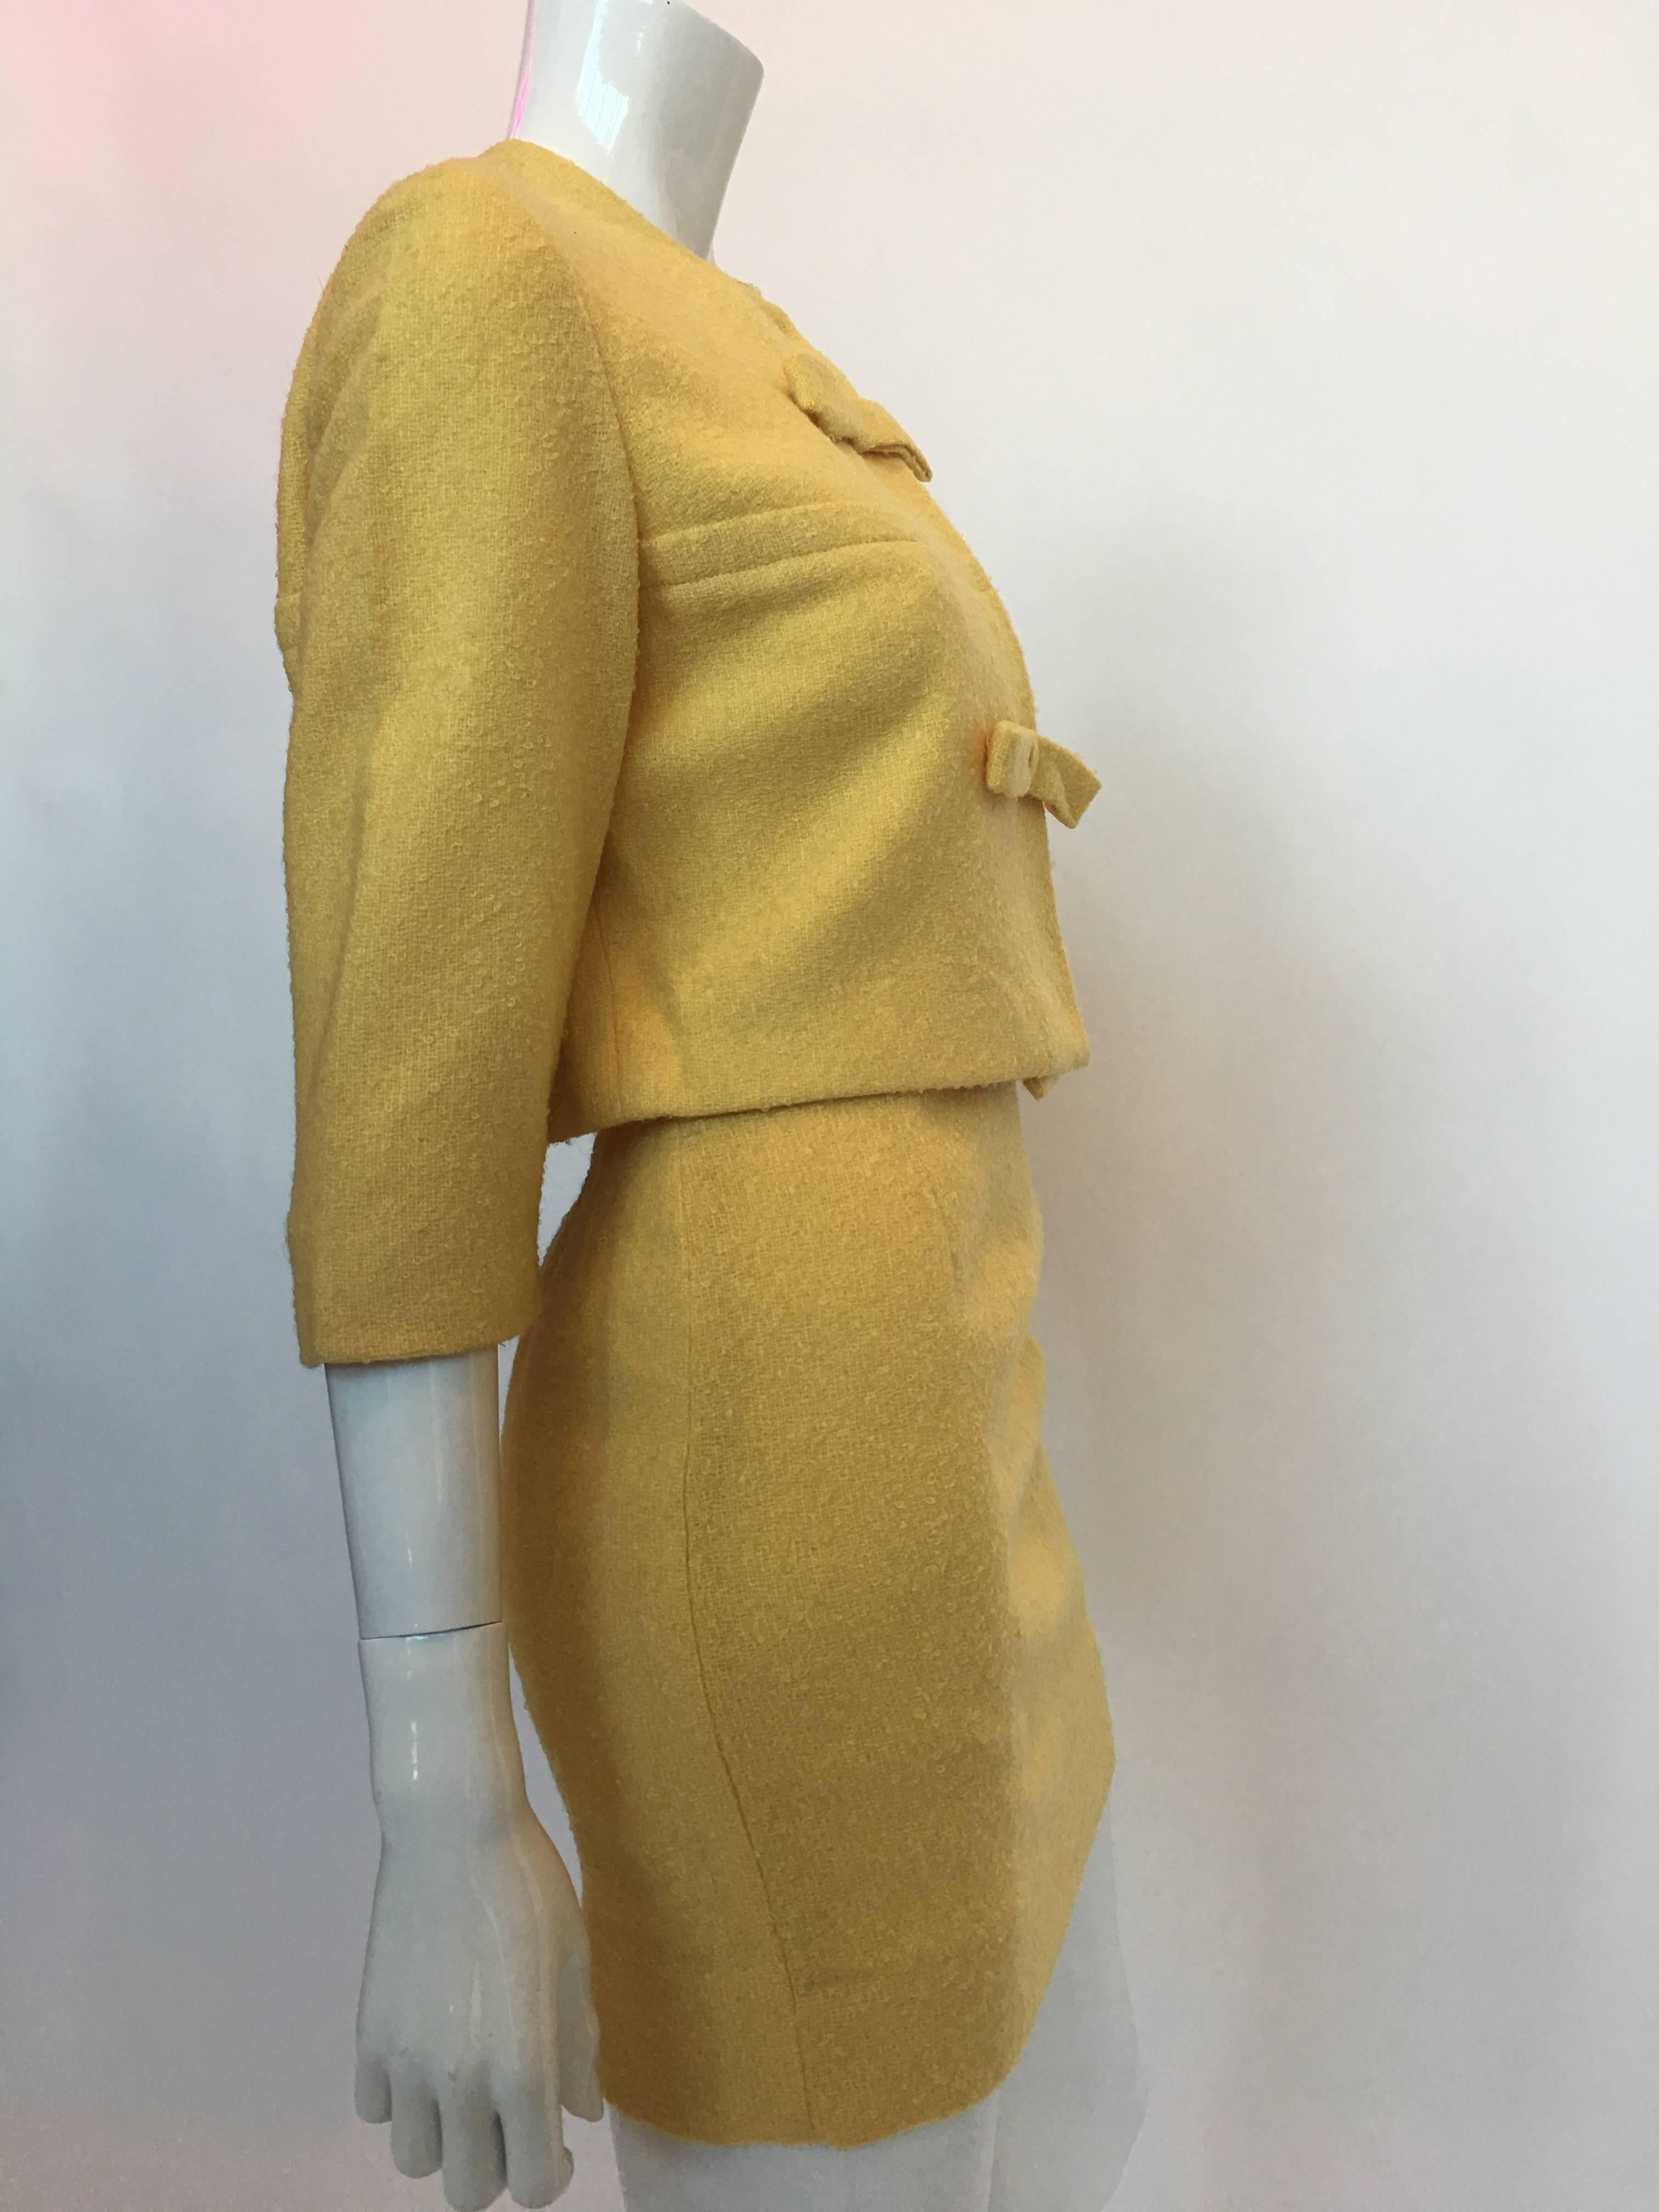 1960s Jackie O Mod Style Butter Yellow Knubby Knit 2 Piece Skirt Suit

Union Label - USA Made
Size Label: N/A

All measurements taken flat:
Shoulders - seam to seam: 15.5